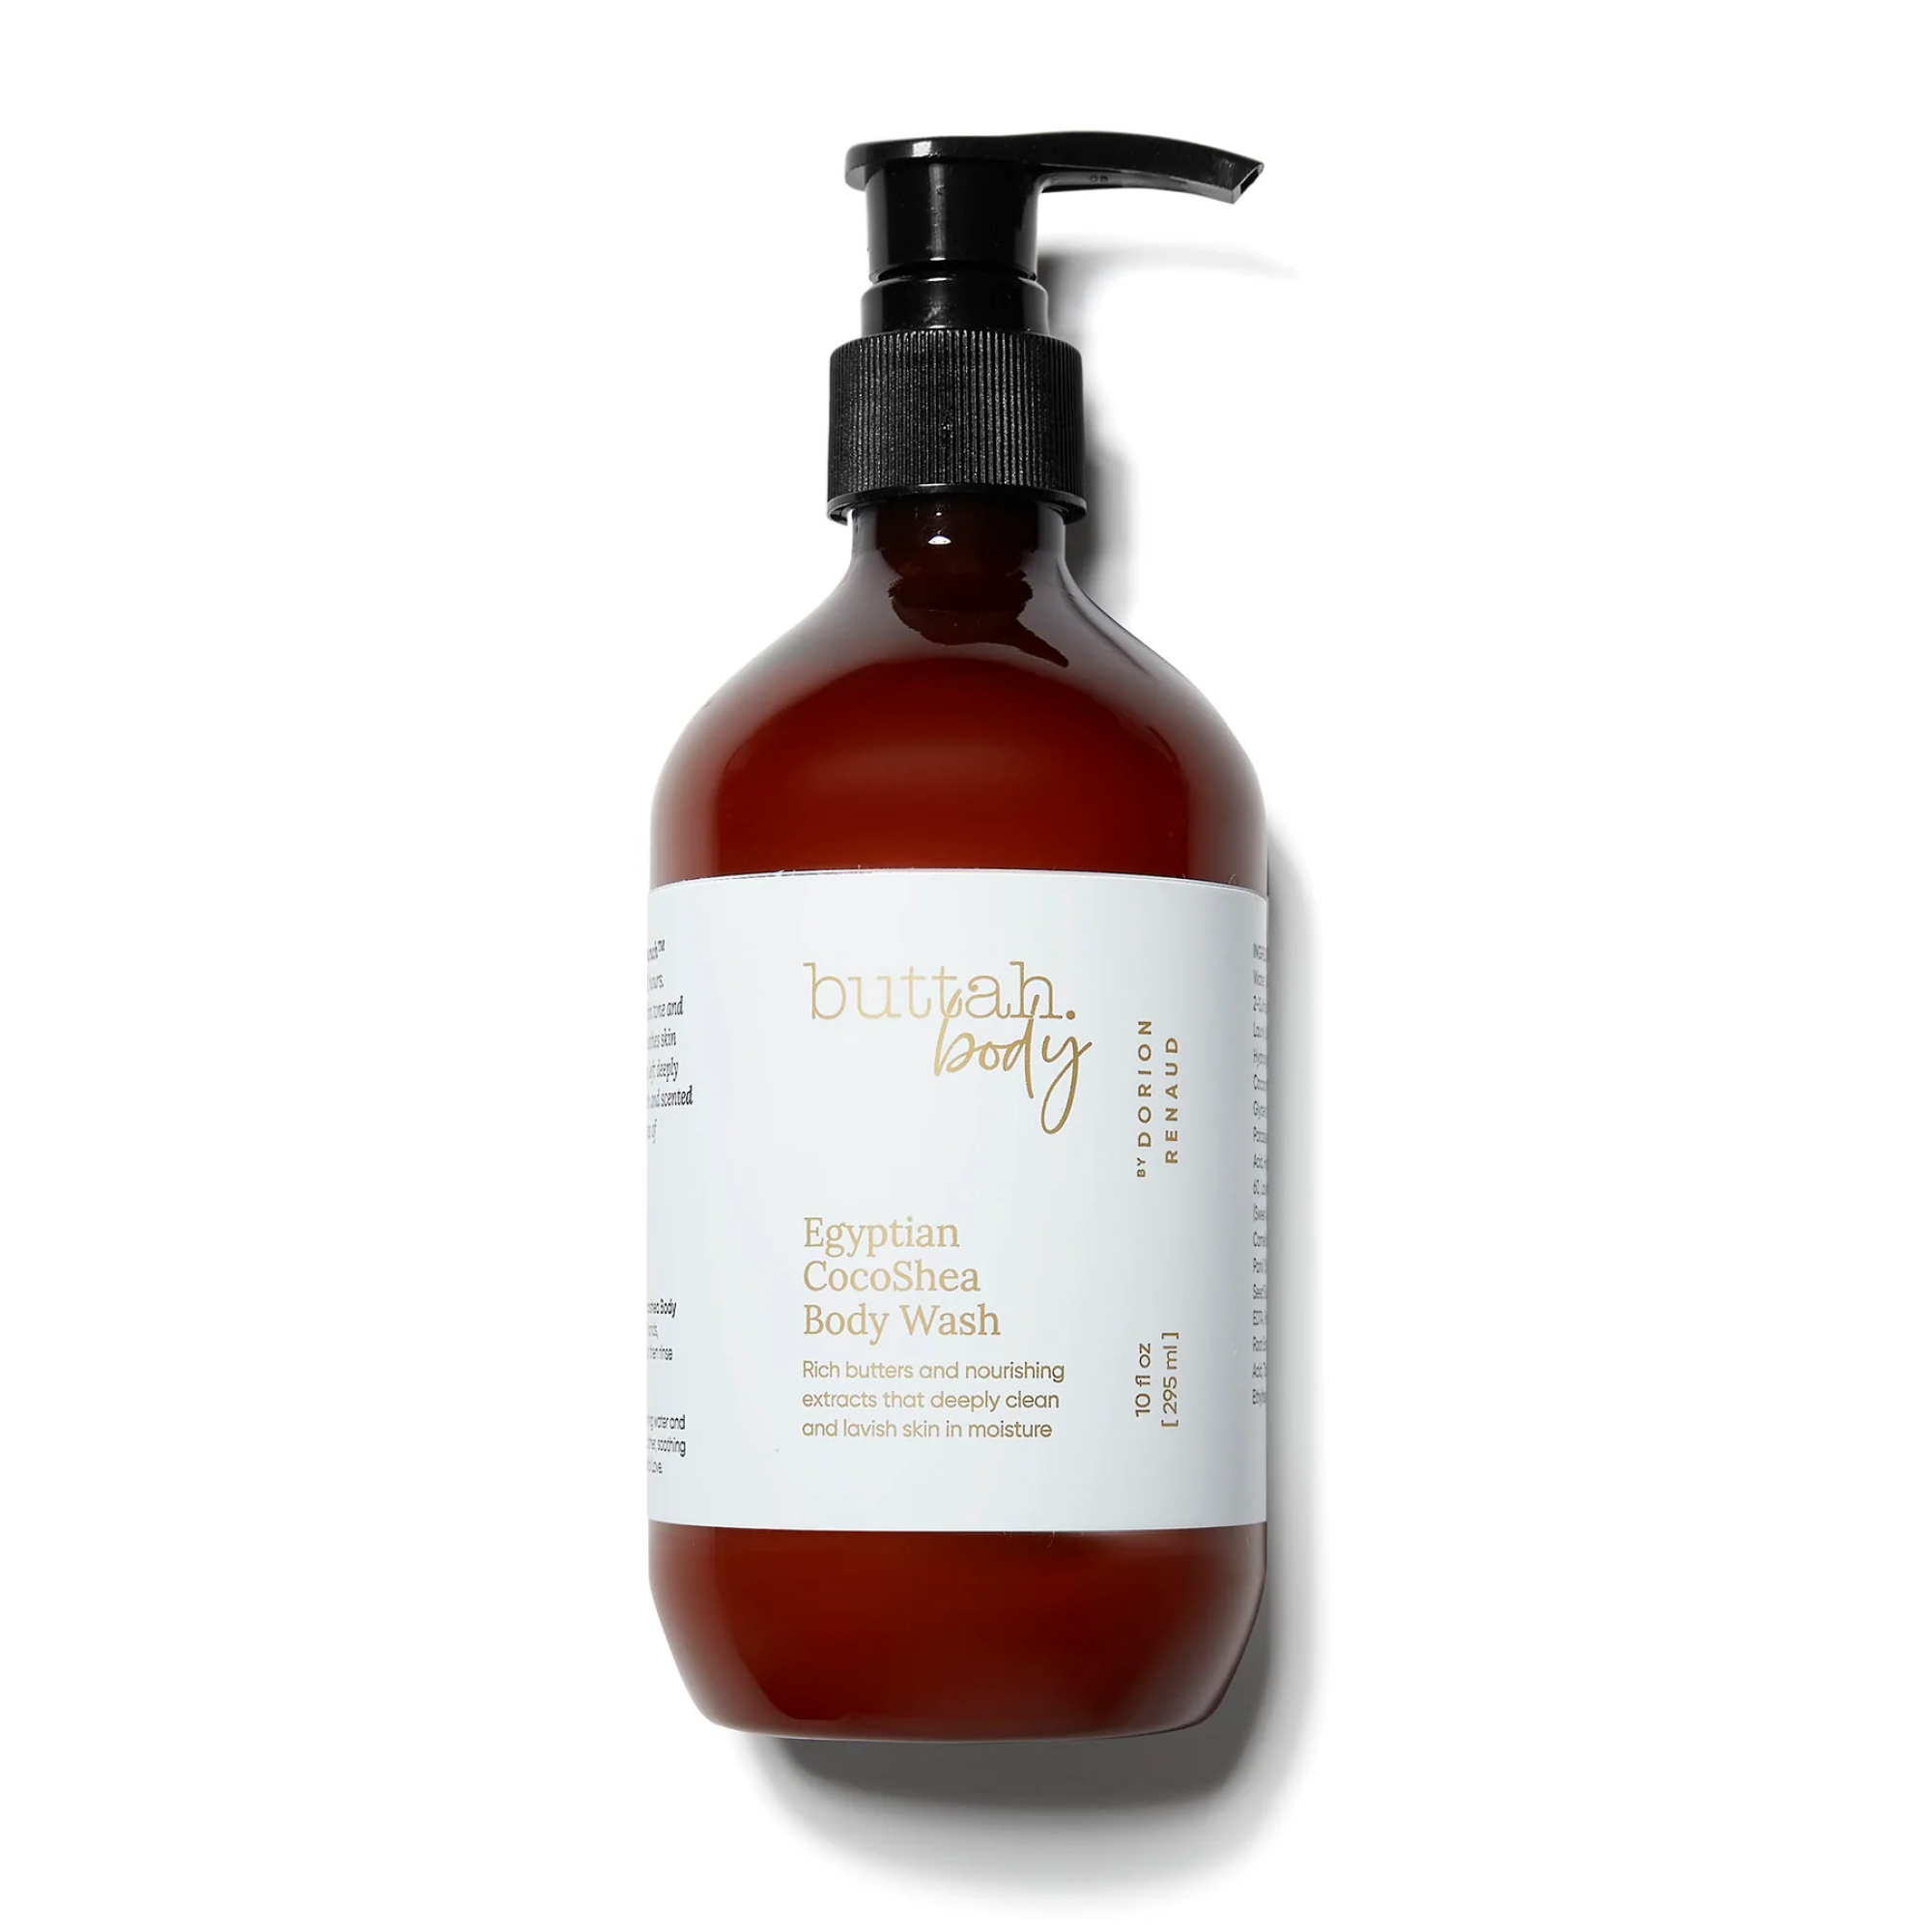 a Buttah Skincare Egyptian CocoShea Body Wash amber bottle with a white label lying on its side on a white background